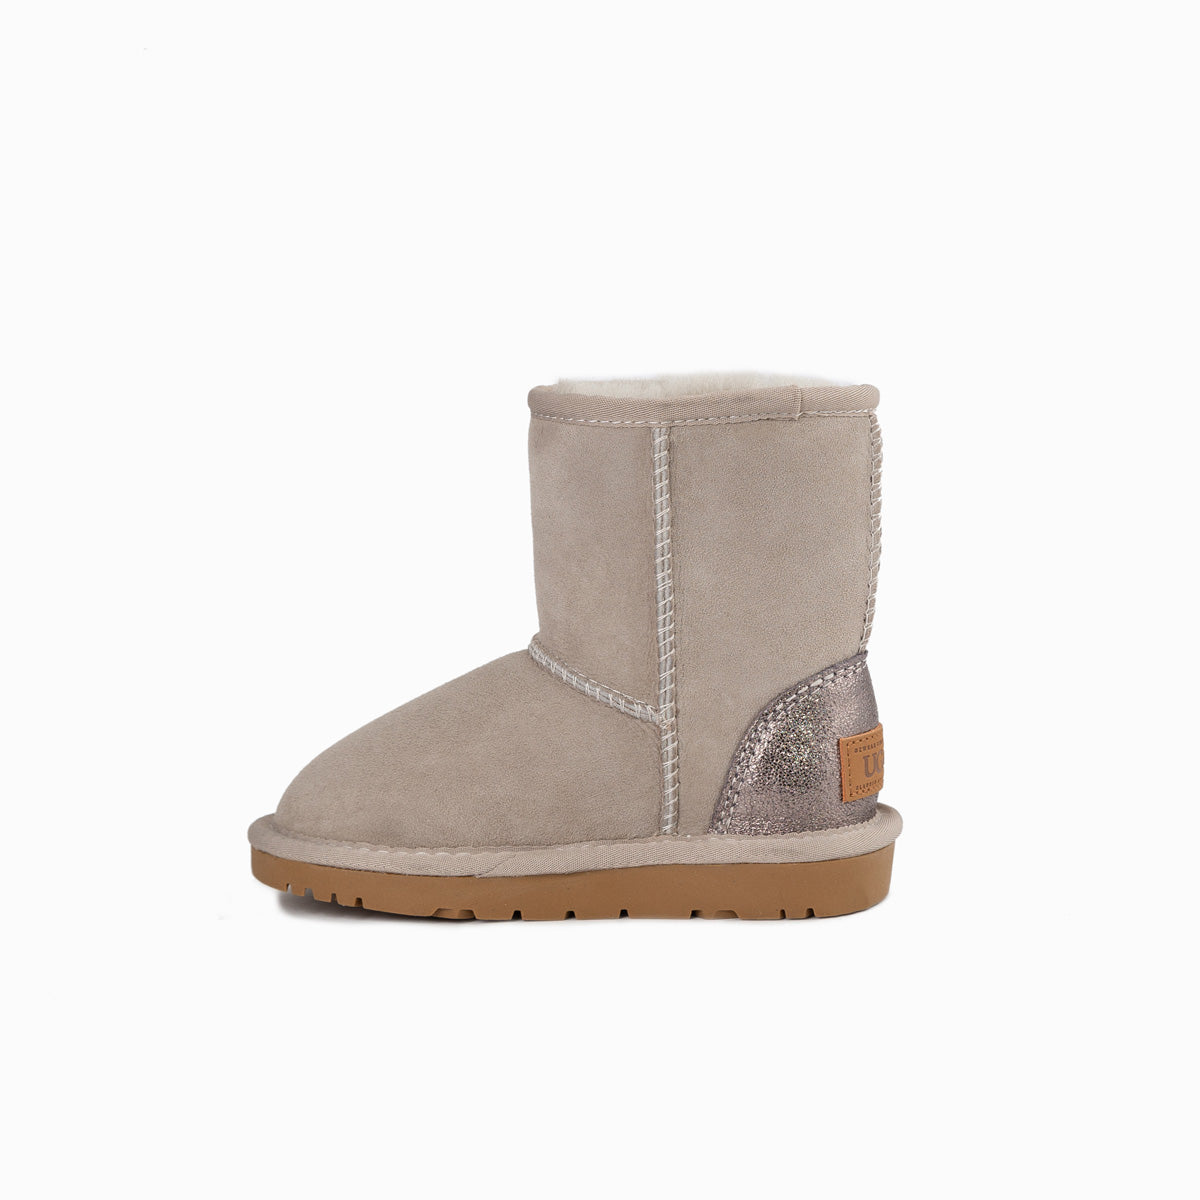 Ugg Kids Classic Long (Glitz) Boots (Water Resistant)-Kid Boots-PEROZ Accessories